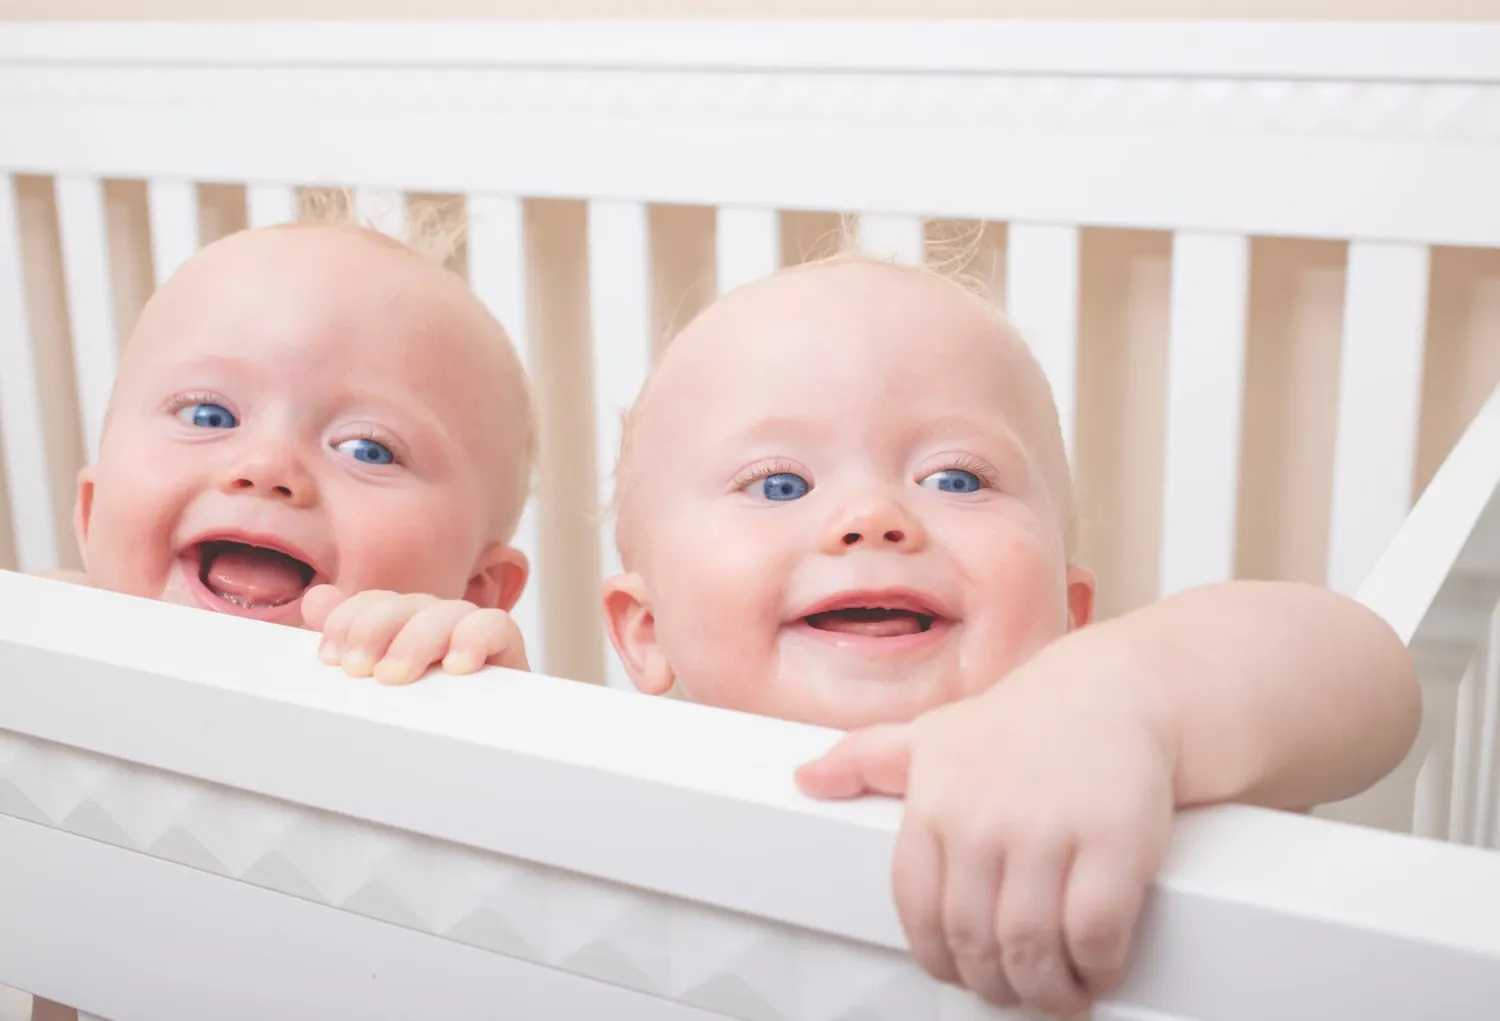 9 month old identical twin boys standing up and laughing in their crib